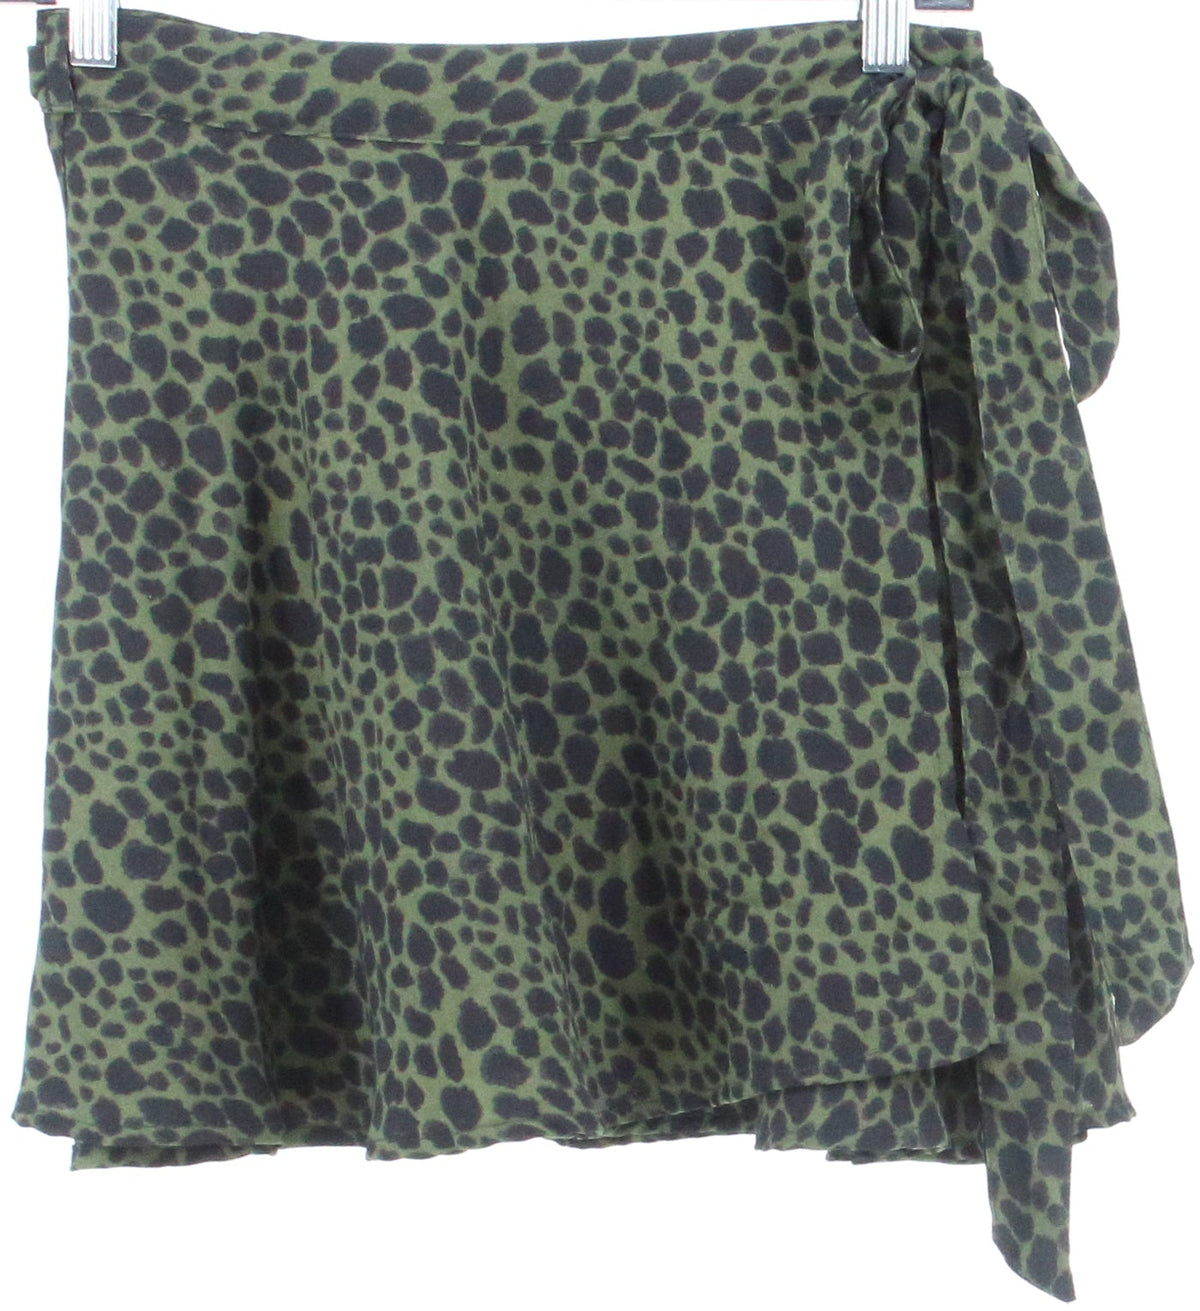 Abercrombie & Fitch Green and Black Print Wrap Skirt